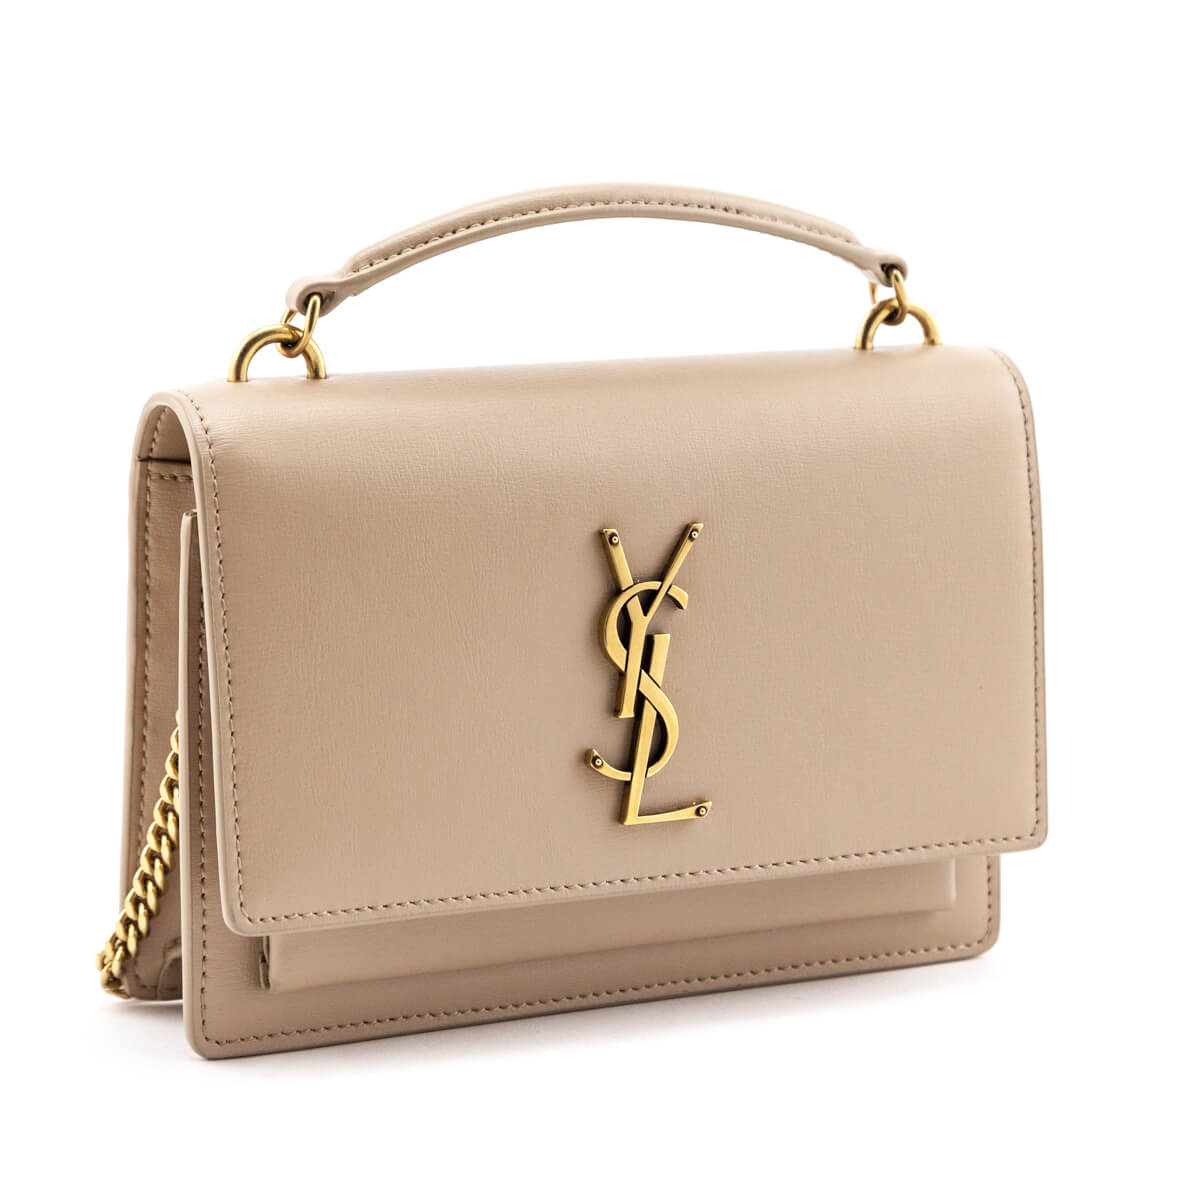 My First Designer Bag Purchase  YSL Saint Laurent Sunset Chain Wallet Mini  Bag Review 